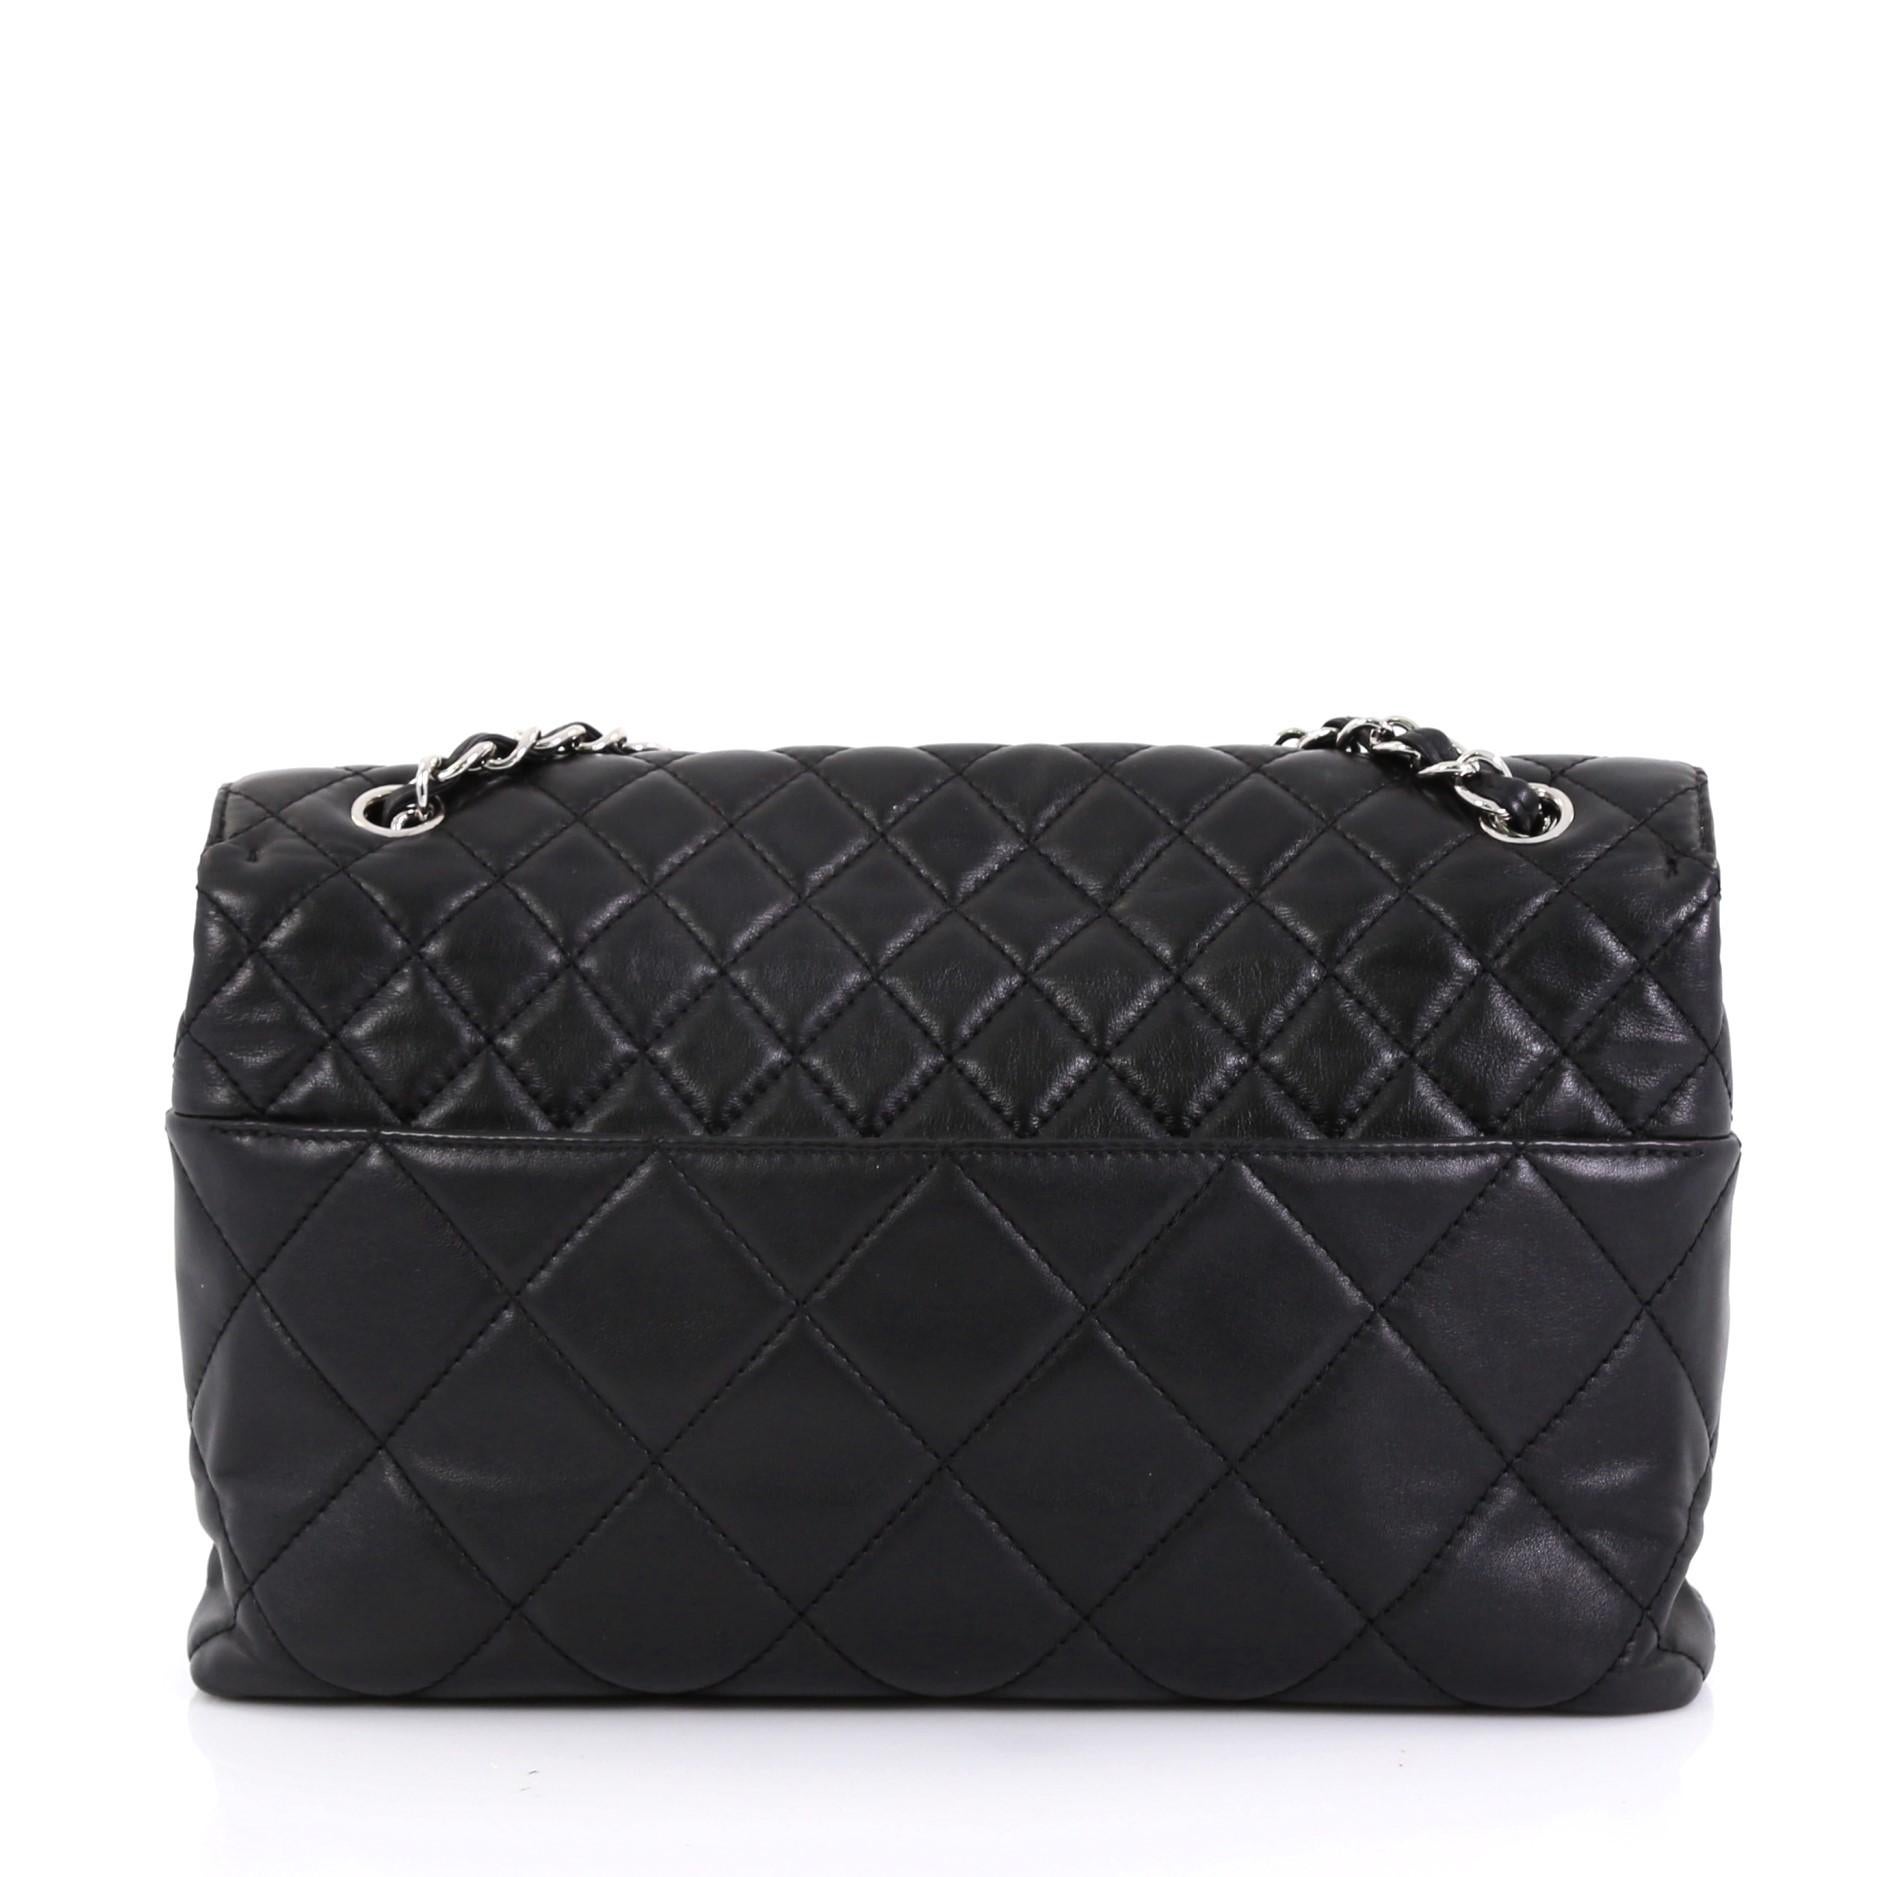 Black Chanel In The Business Flap Bag Quilted Lambskin Maxi